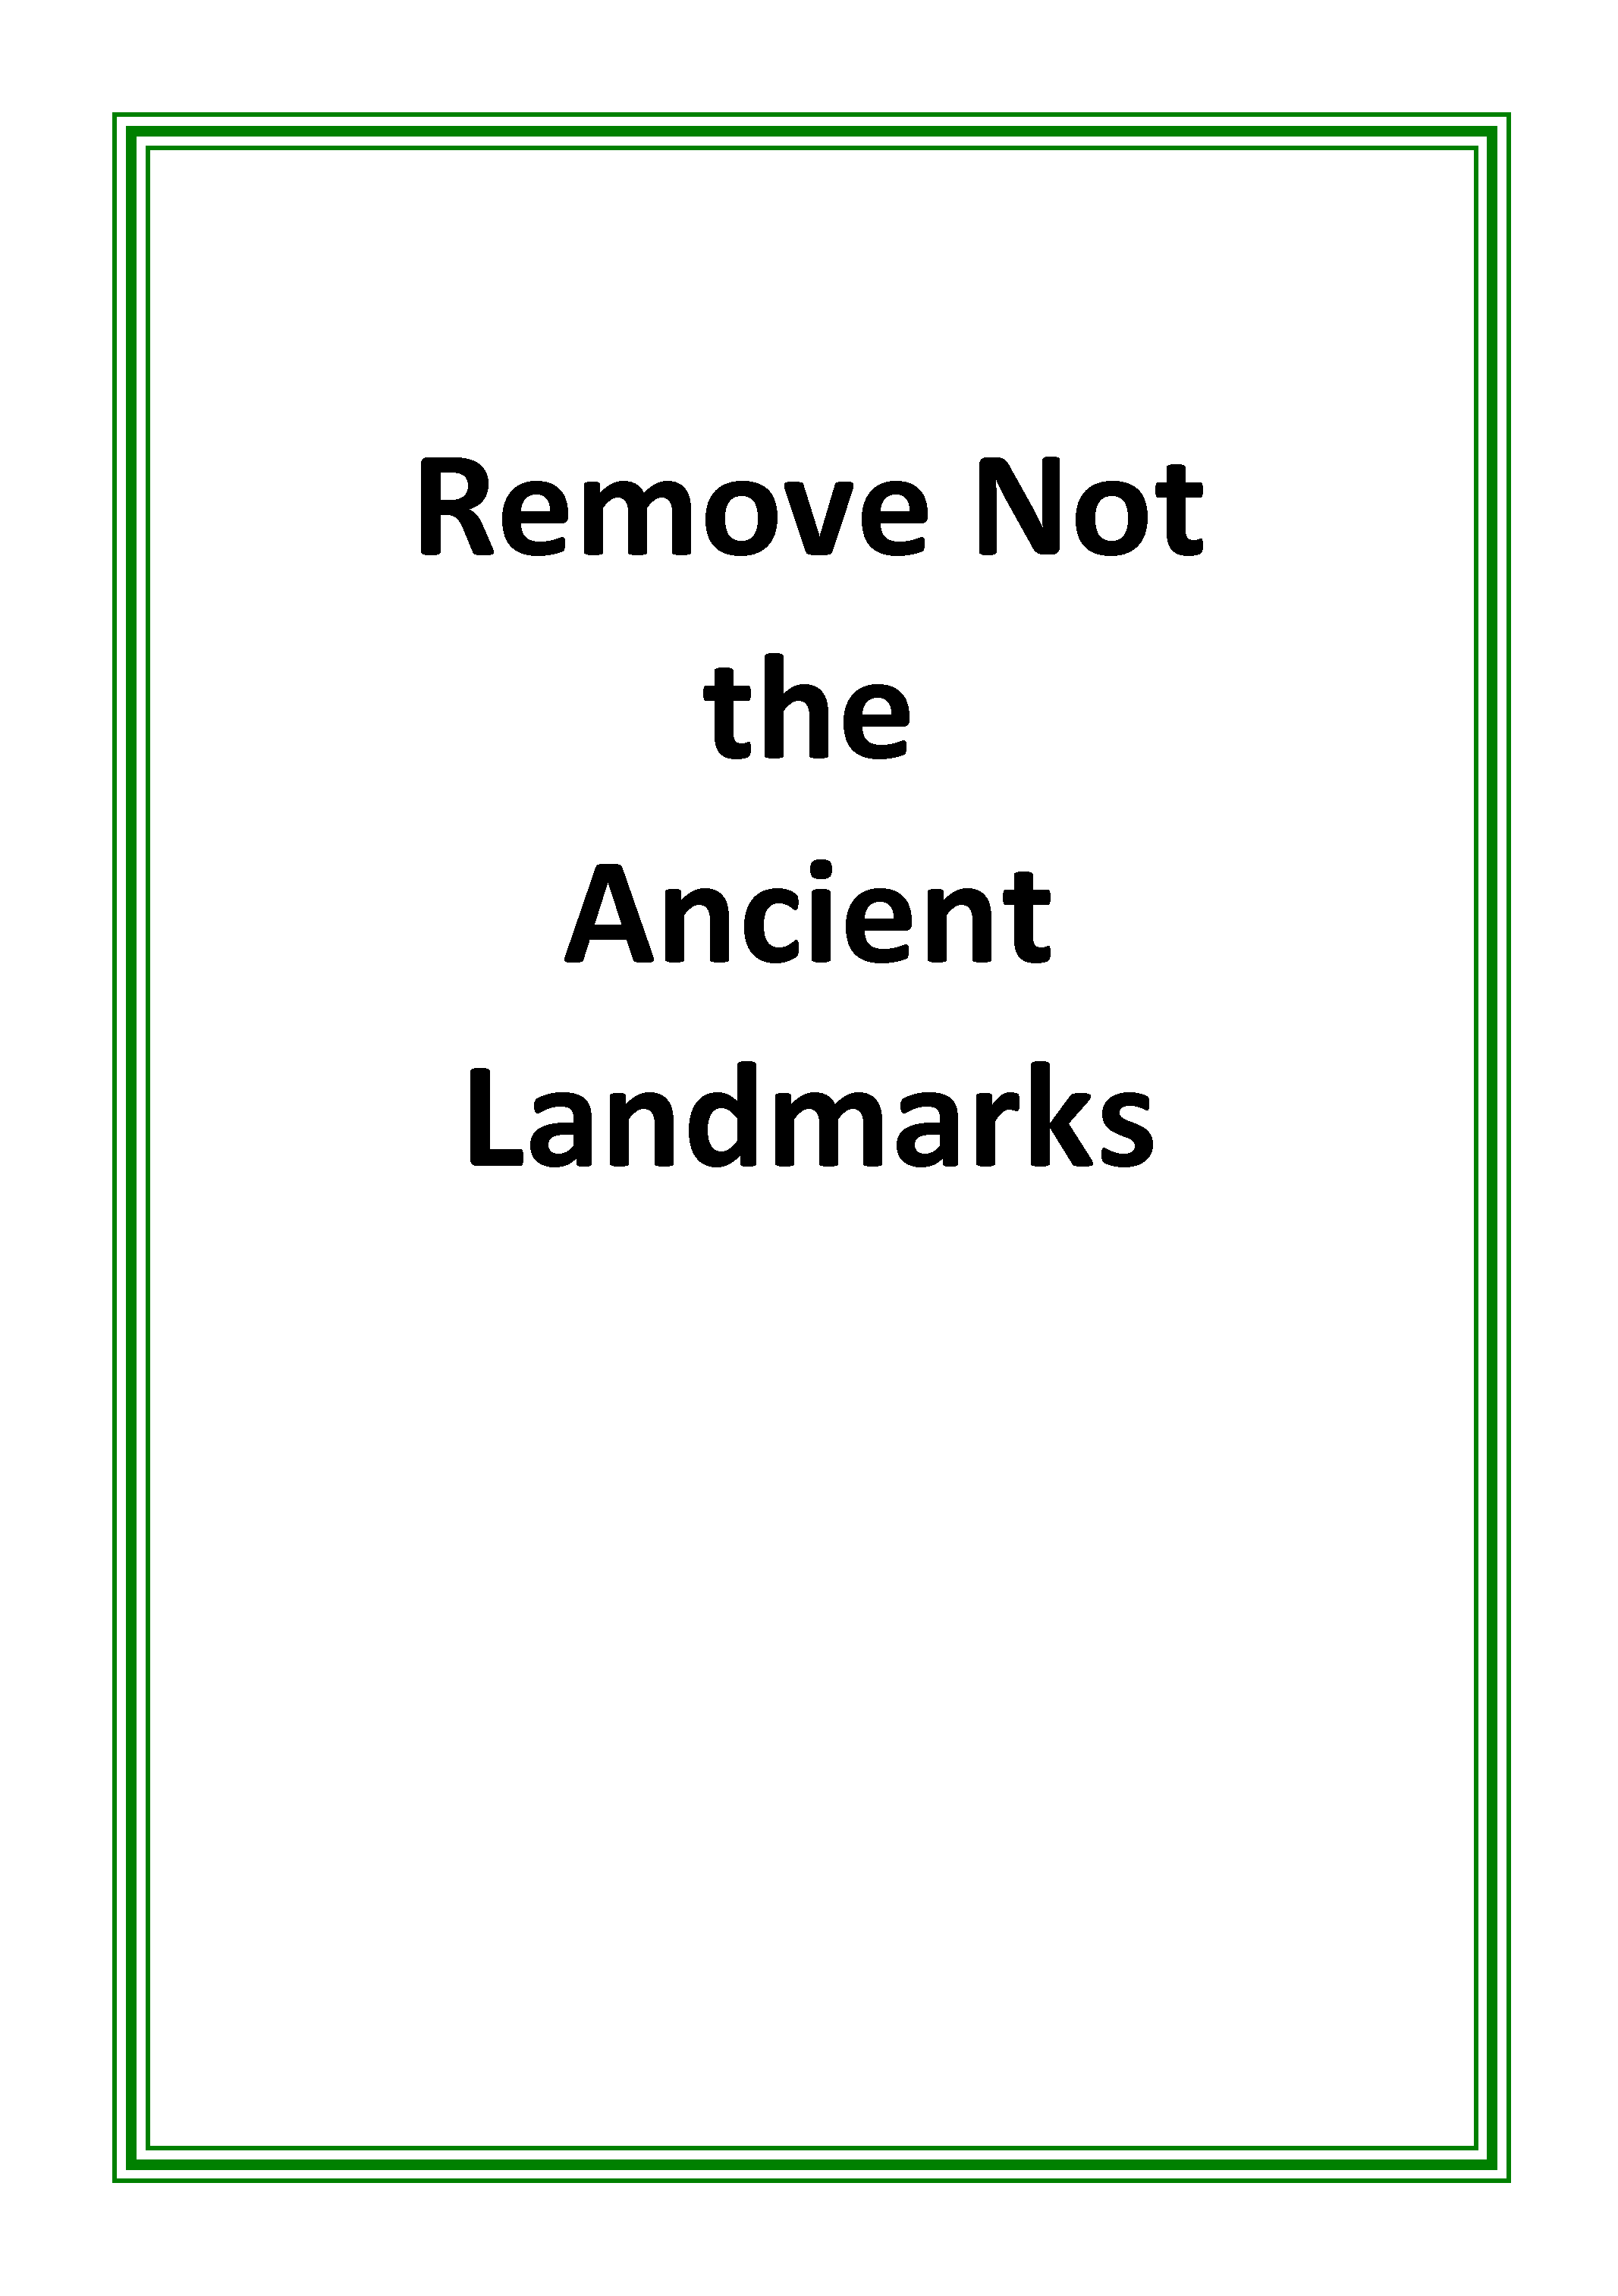 (B)_Remove_Not_the_Ancient_Landmarks